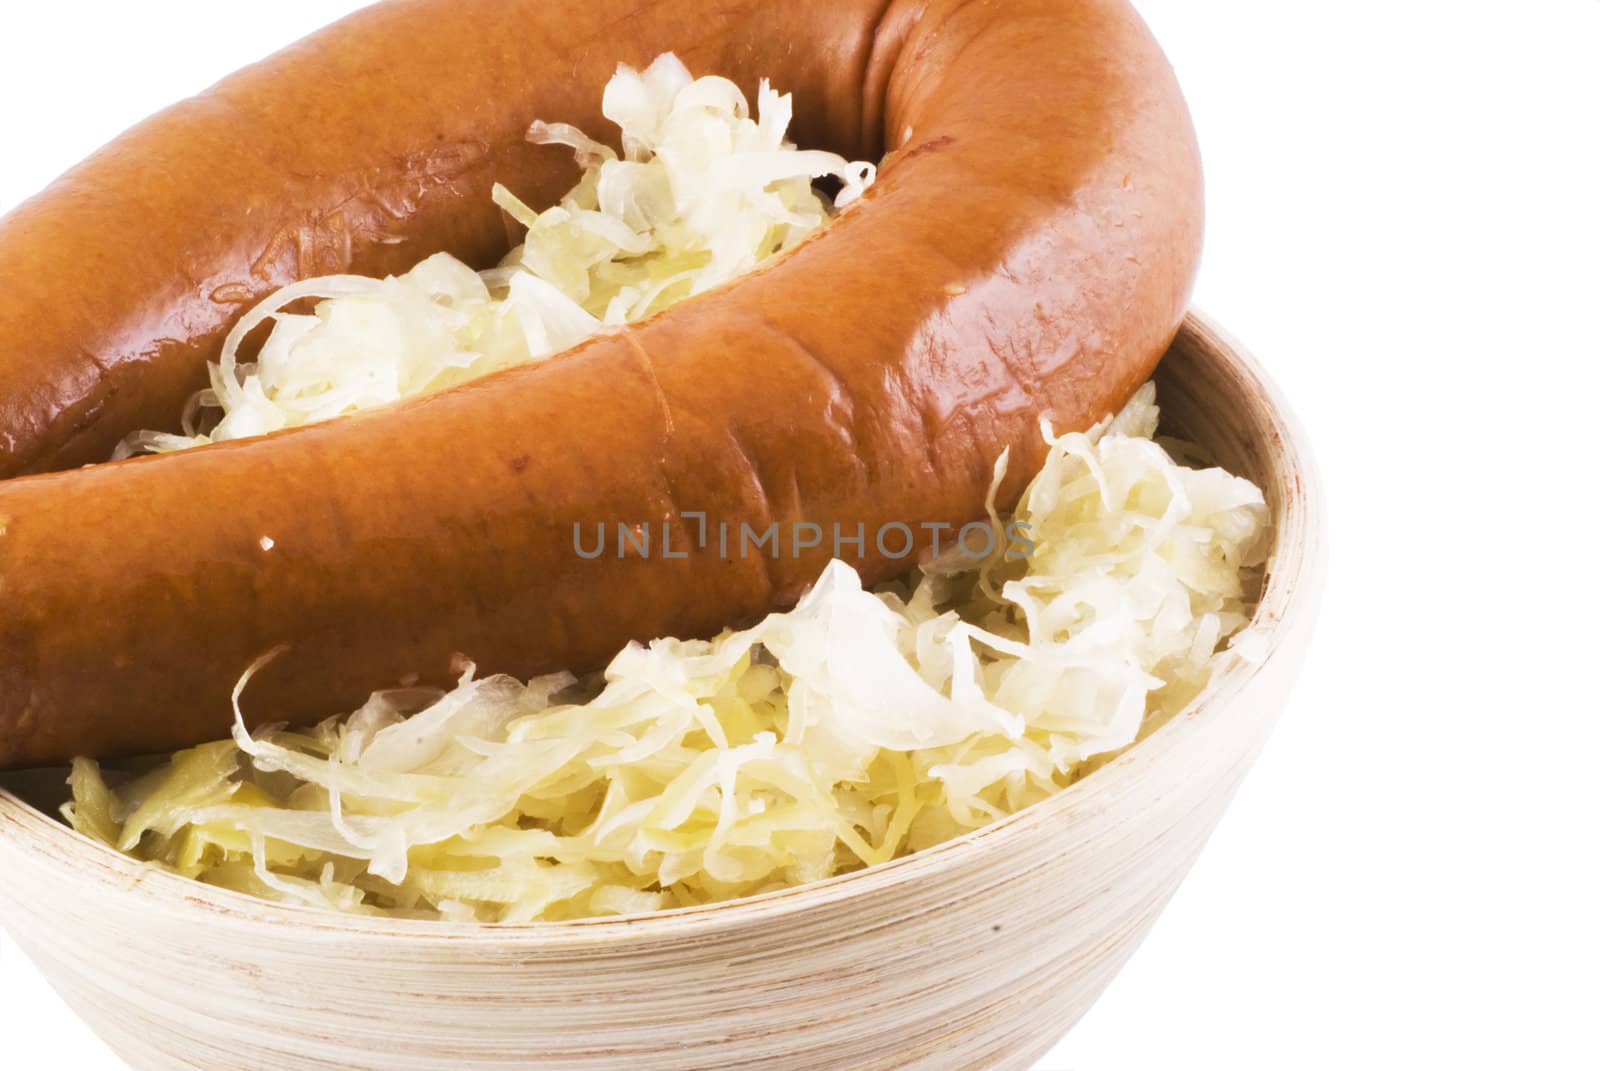 Close up of a wooden bowl with sauerkraut and a smoked sausage.